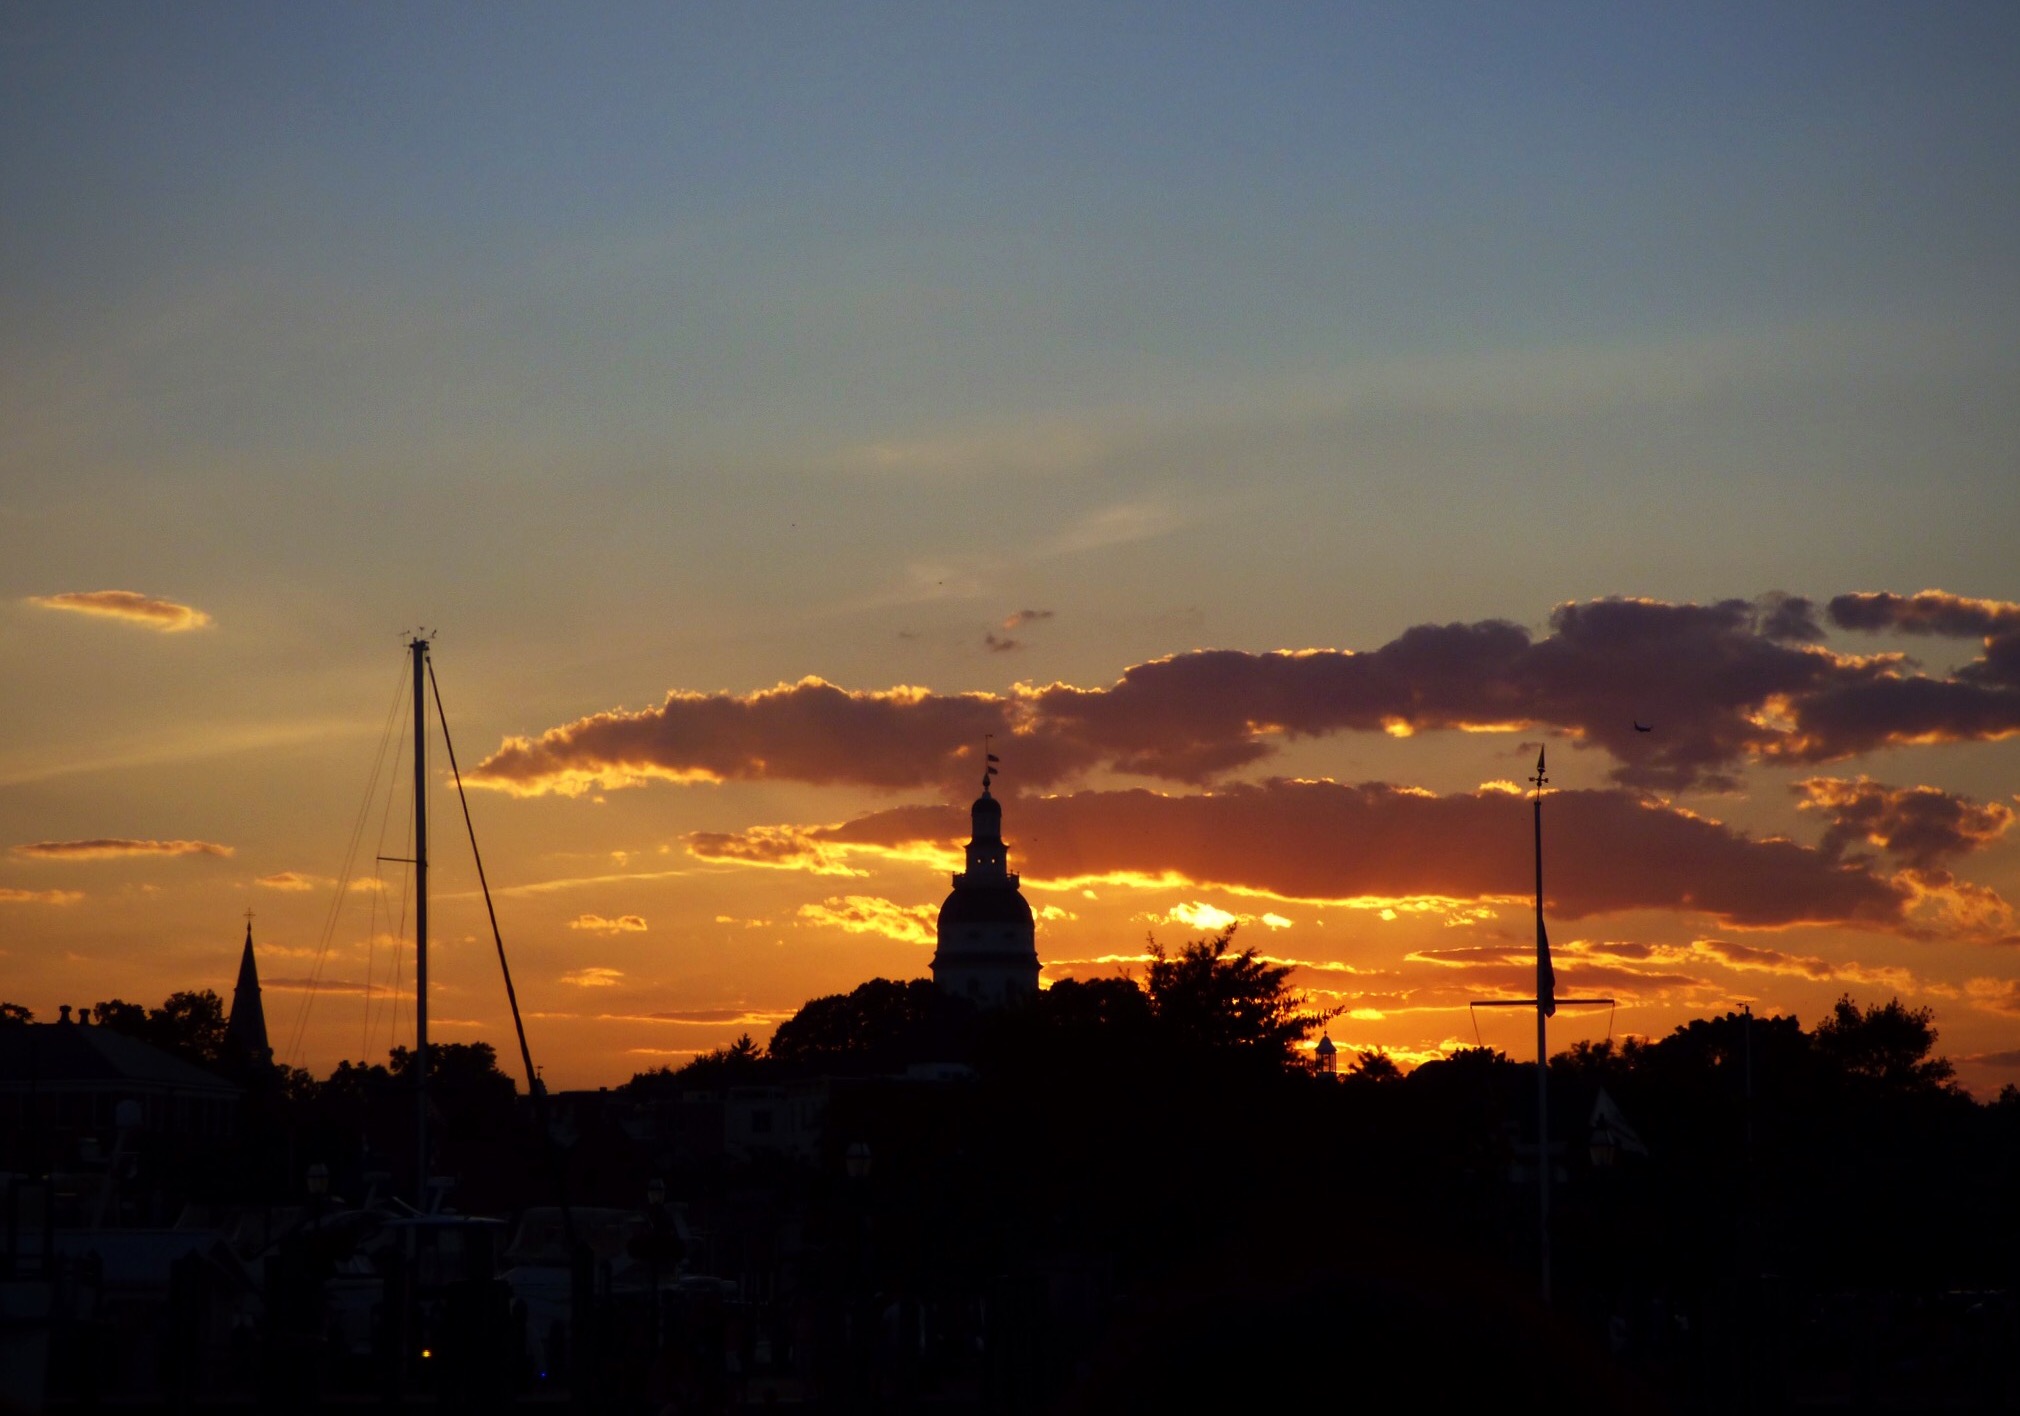 The Annapolis Capital dome at sunset